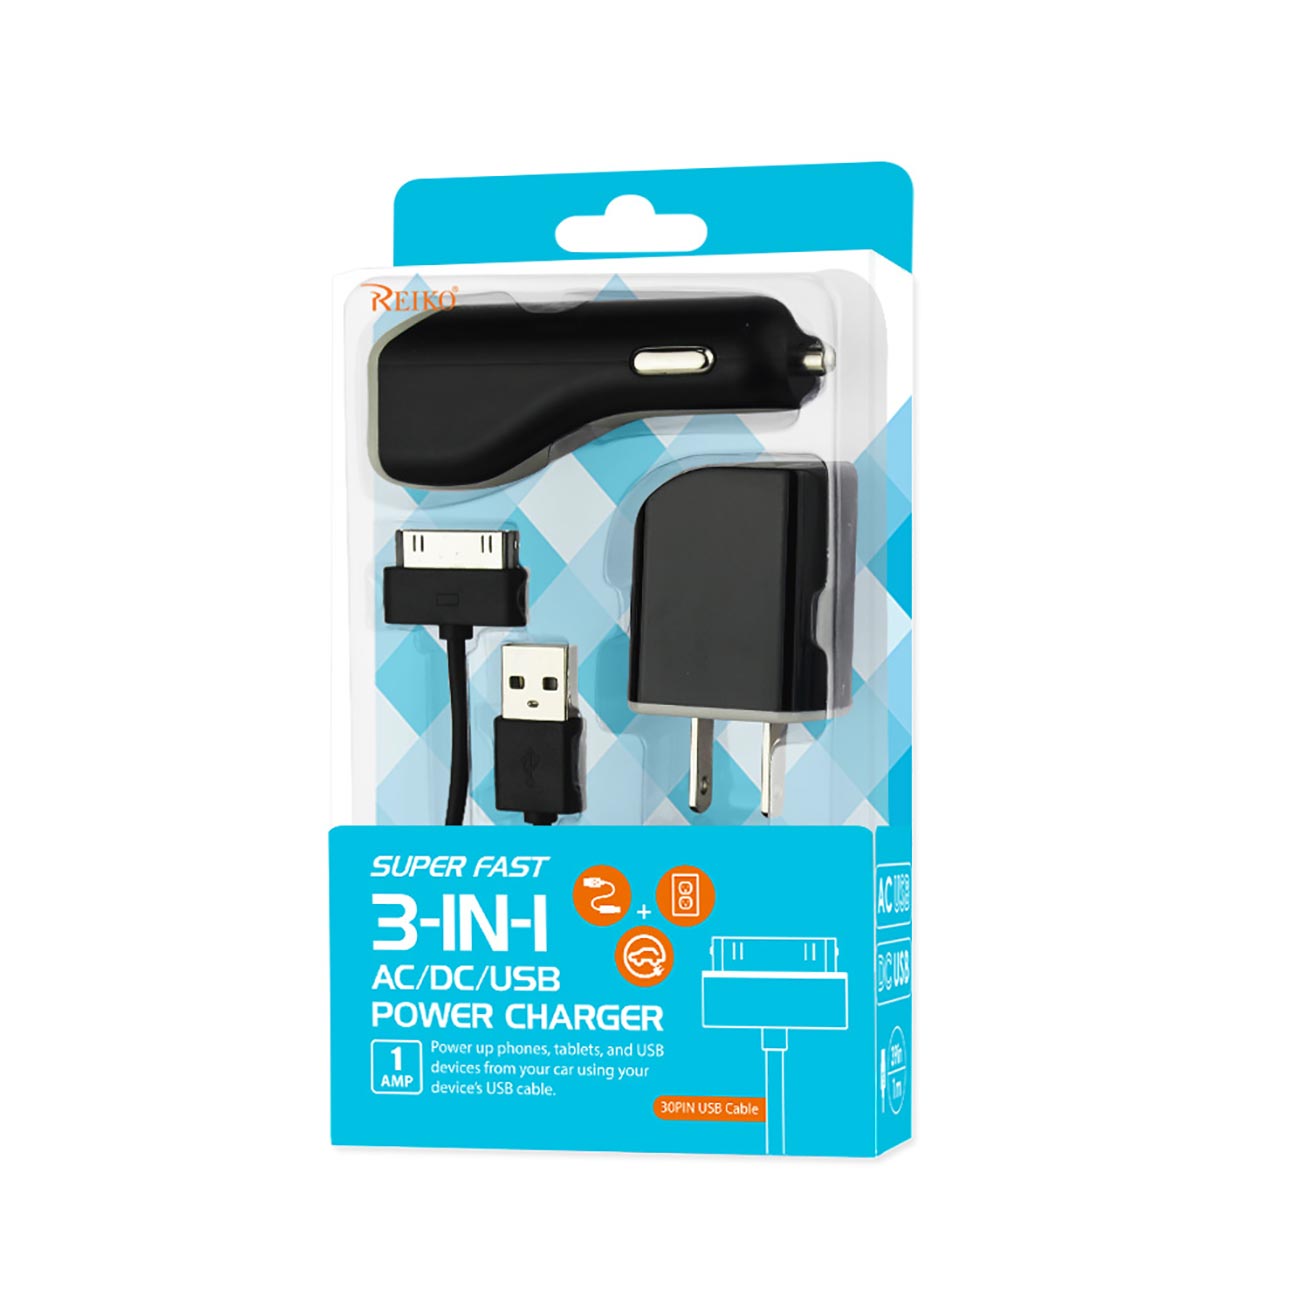 IPHONE 4G 1 AMP 3-IN-1 CAR CHARGER WALL ADAPTER WITH CABLE IN BLACK